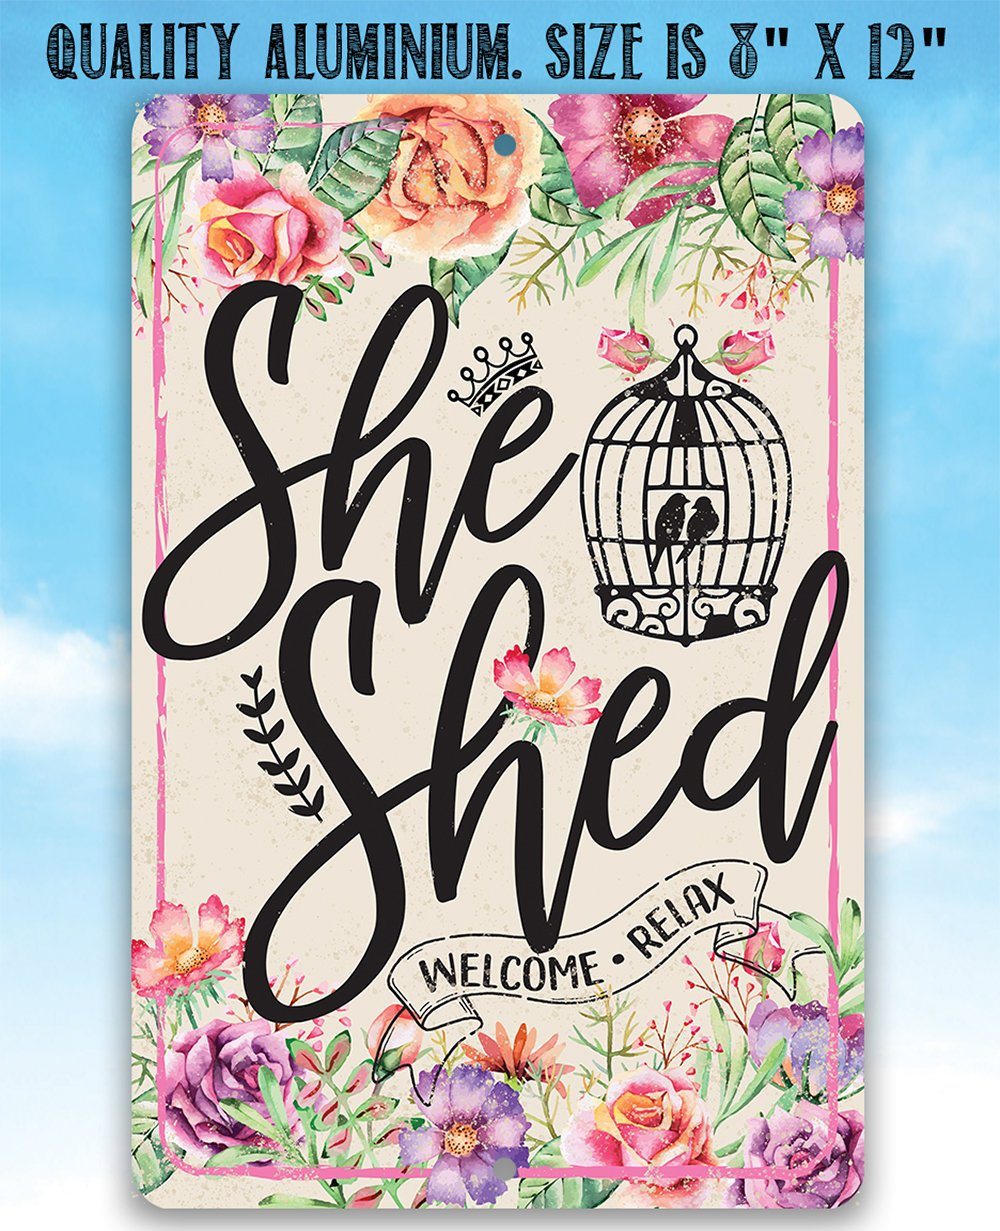 She Shed - Pink - Metal Sign | Lone Star Art.